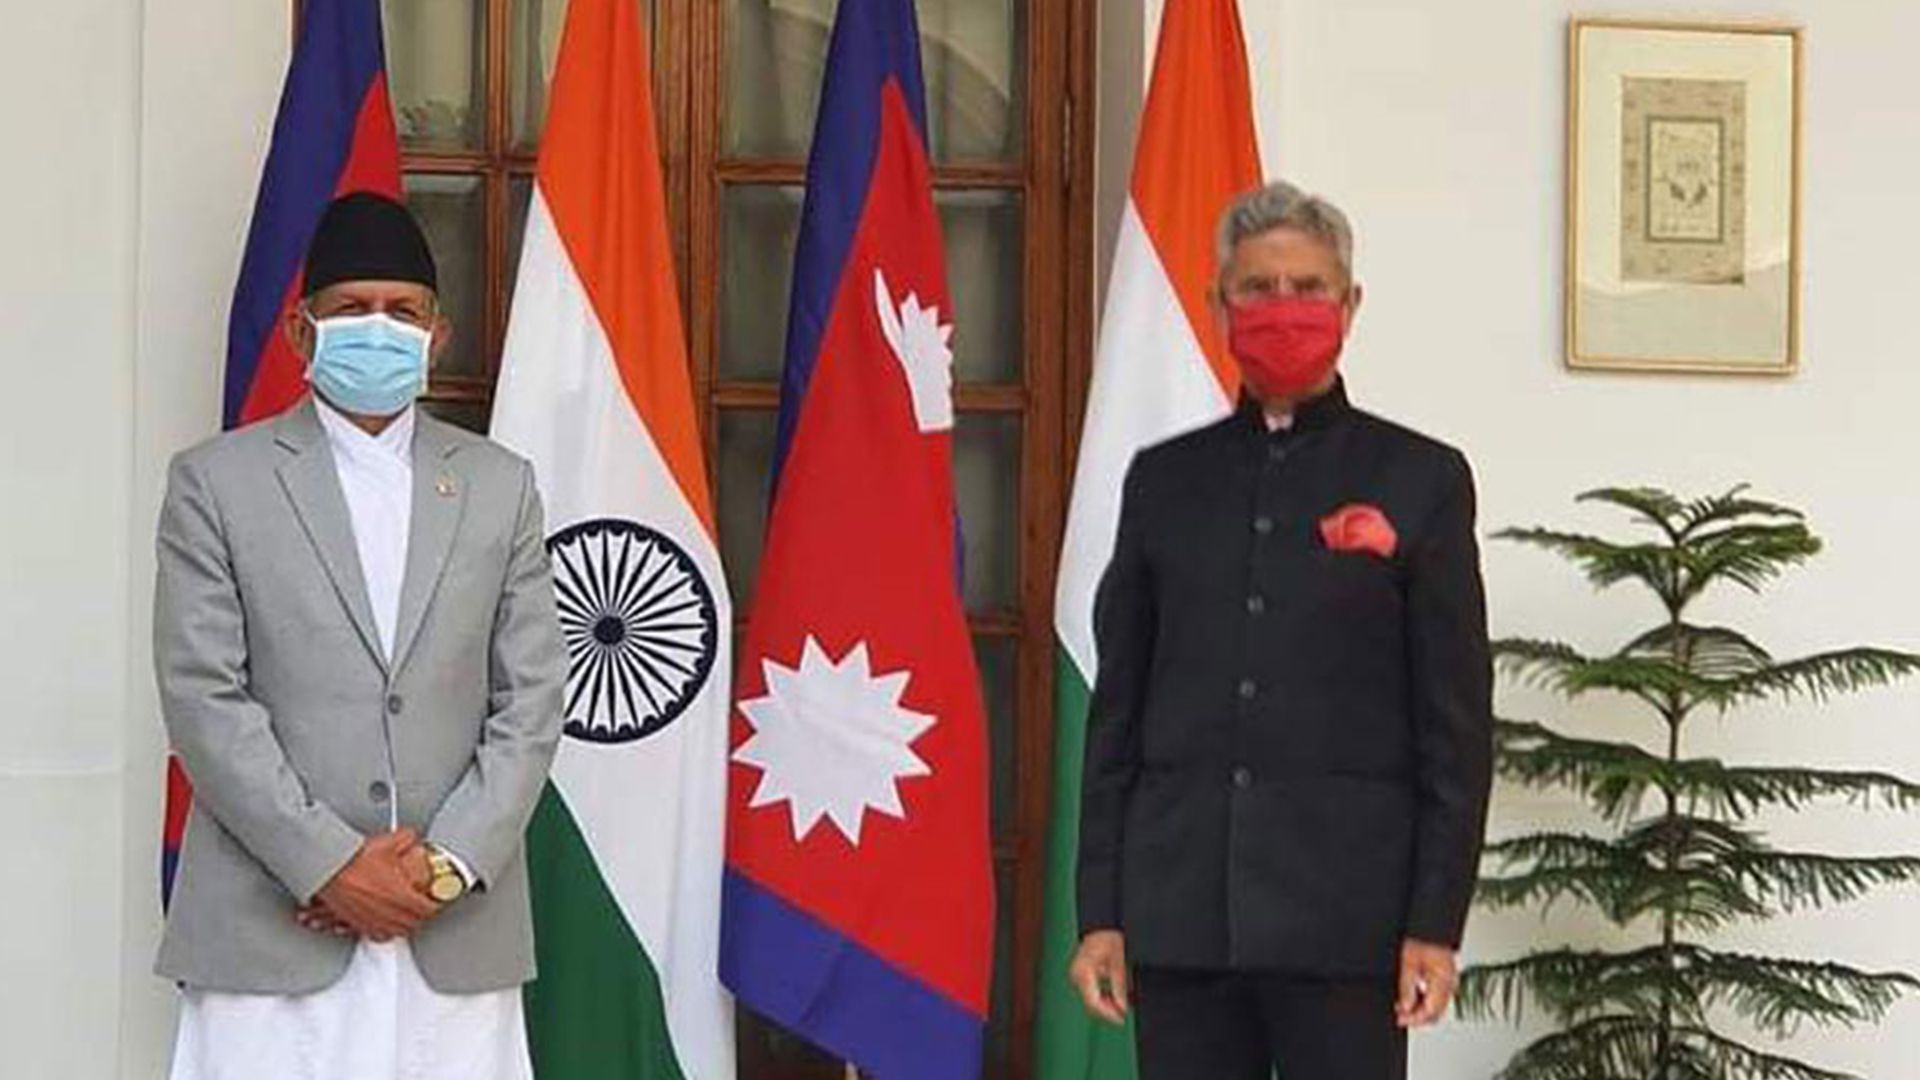 Meeting between the Foreign Ministers of Nepal and India